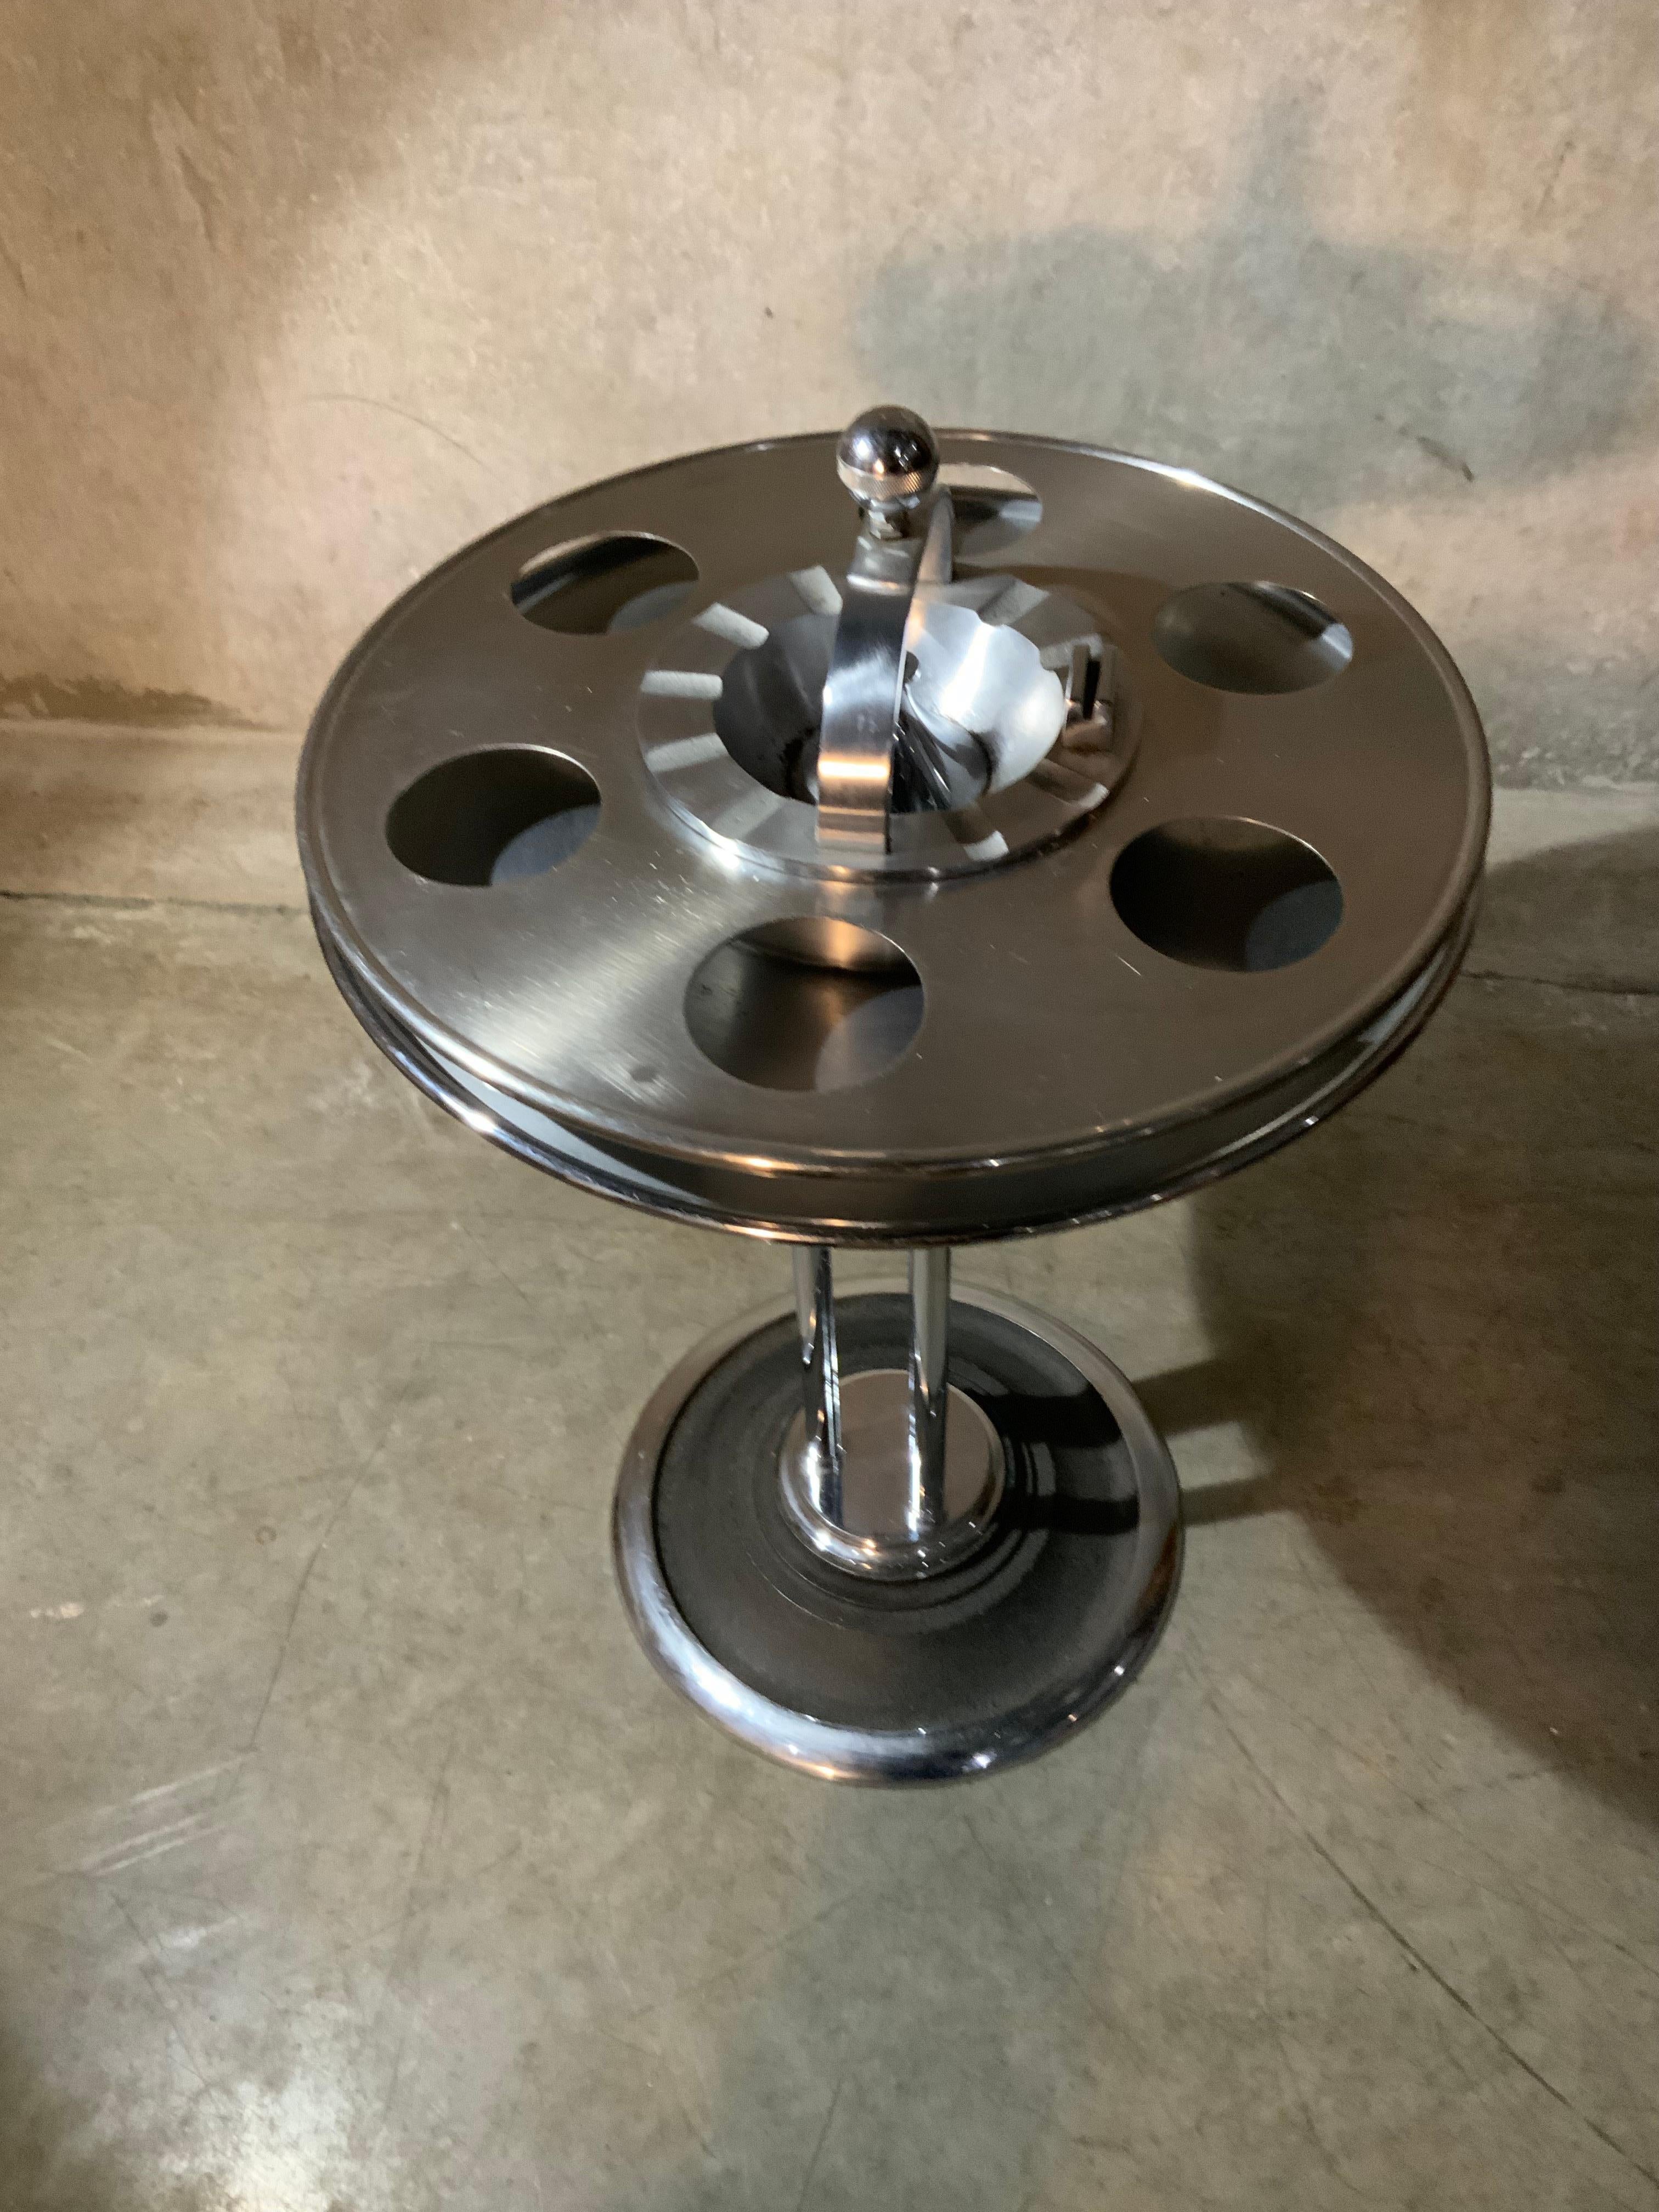 A great Art Deco streamline ash stand from a trains bar car with outer drink tray and match holder. Nickel-plated with satin black details and strong styling from the period, manufactured by W.J. Campbell Machine Company, Indianapolis, IN.

W.J.